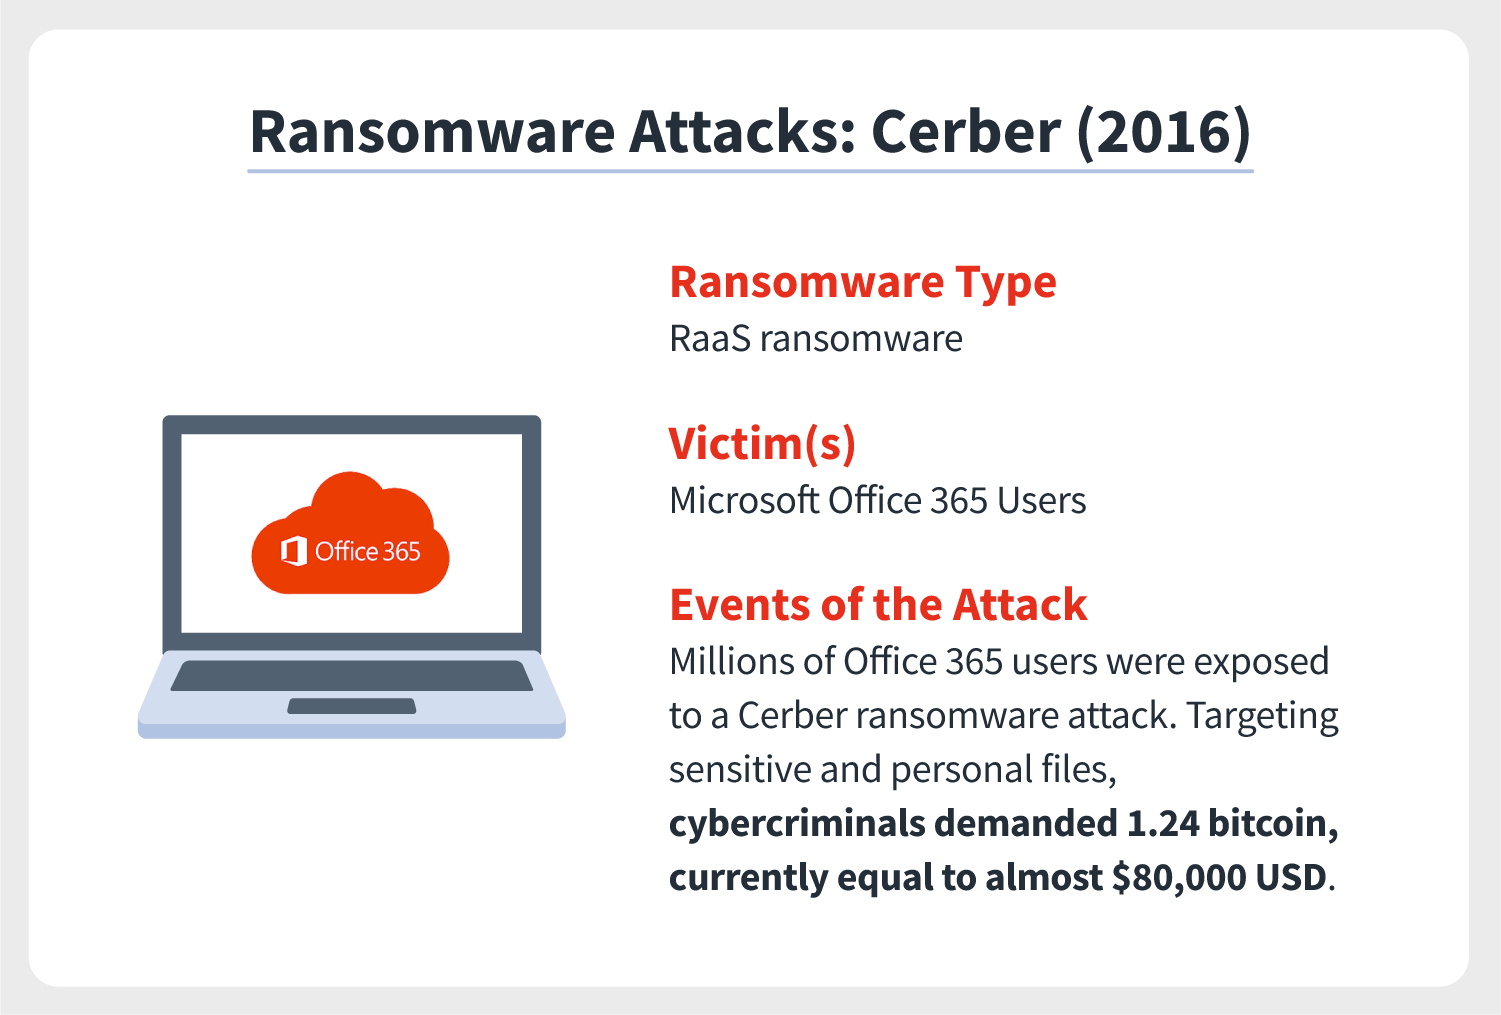 An illustration accompanies information regarding a Cerber ransomware attack that took place in 2016. 